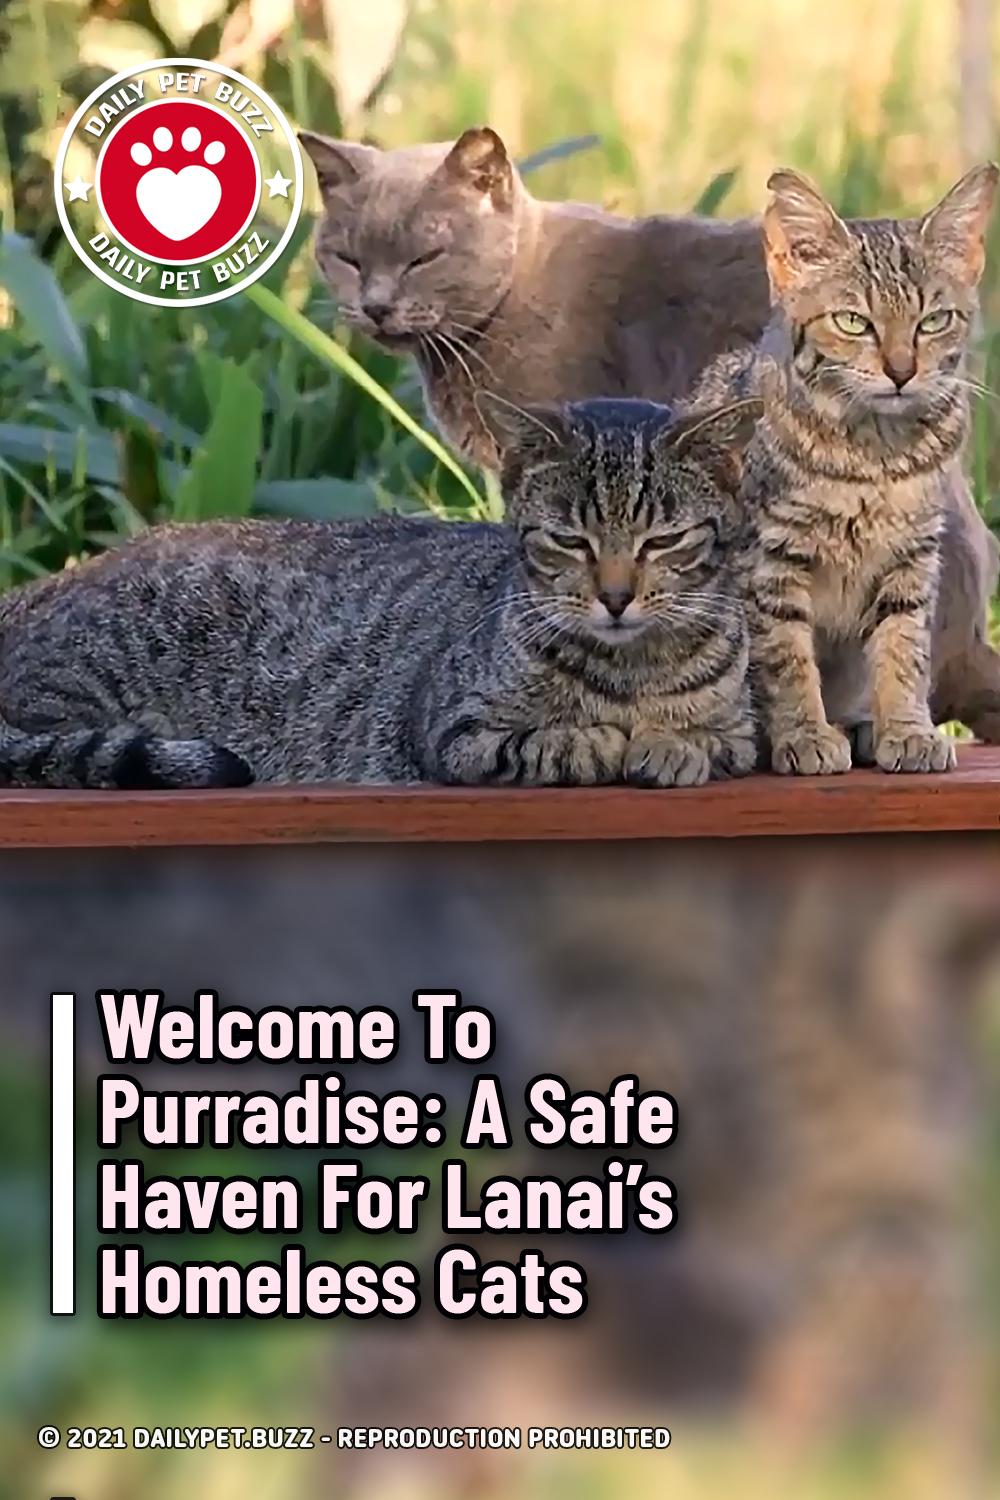 Welcome To Purradise: A Safe Haven For Lanai’s Homeless Cats